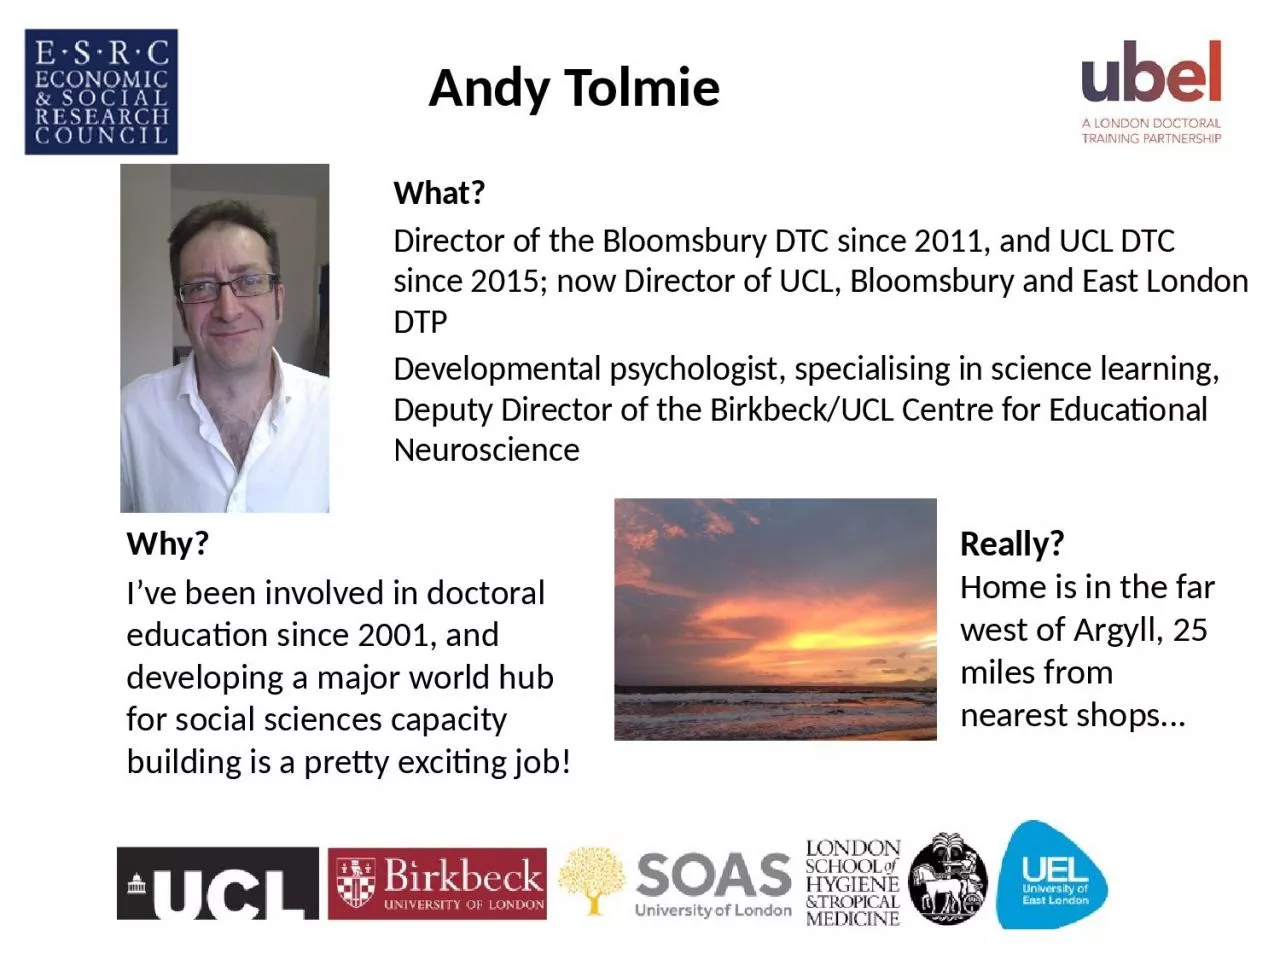 What? Director of the Bloomsbury DTC since 2011, and UCL DTC since 2015; now Director